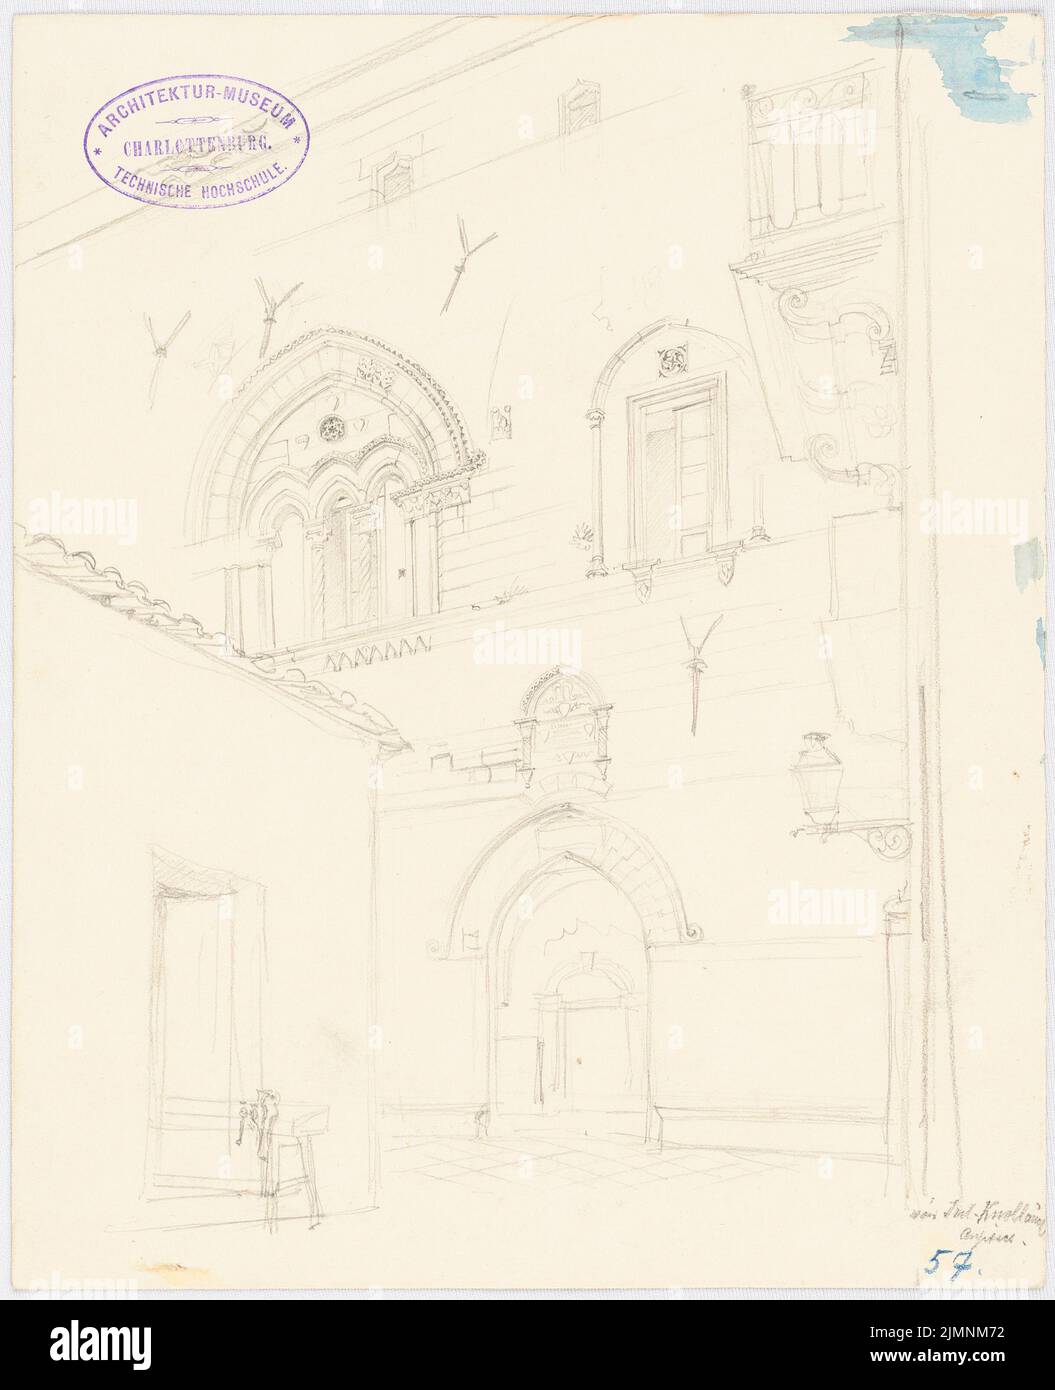 Knoblauch Julius, Tuscany travel sketches (1882-1883): Medieval city palace, perspective view. Pencil on cardboard, 25.9 x 21.1 cm (including scan edges) Knoblauch Julius : Reiseskizzen Toskana Stock Photo